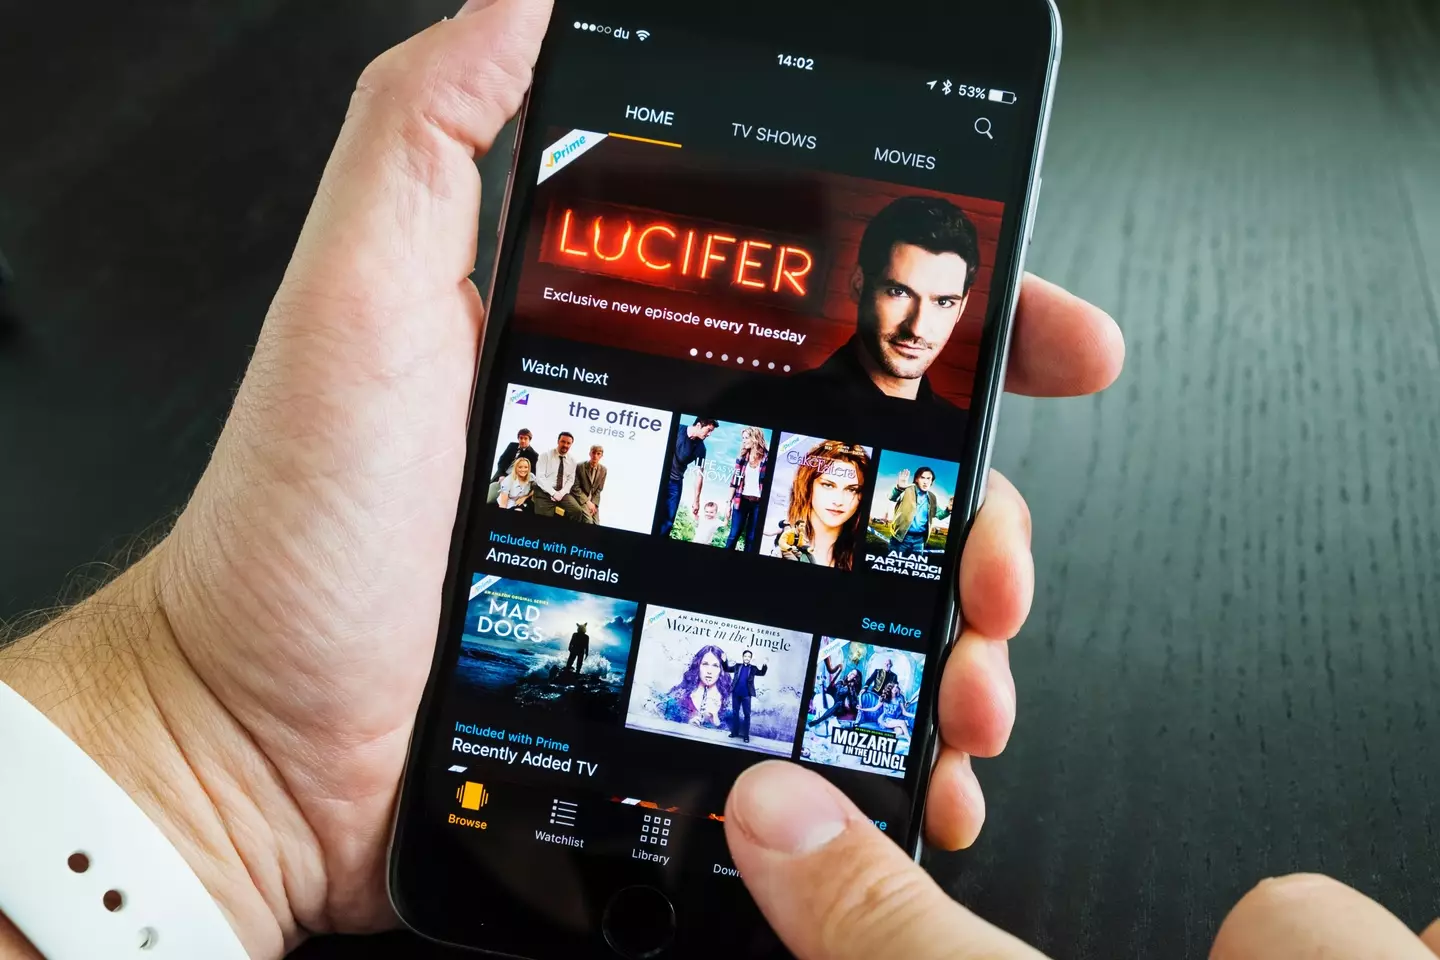 Monthly streaming prices will jump from £7.99 to £8.99 on Thursday.